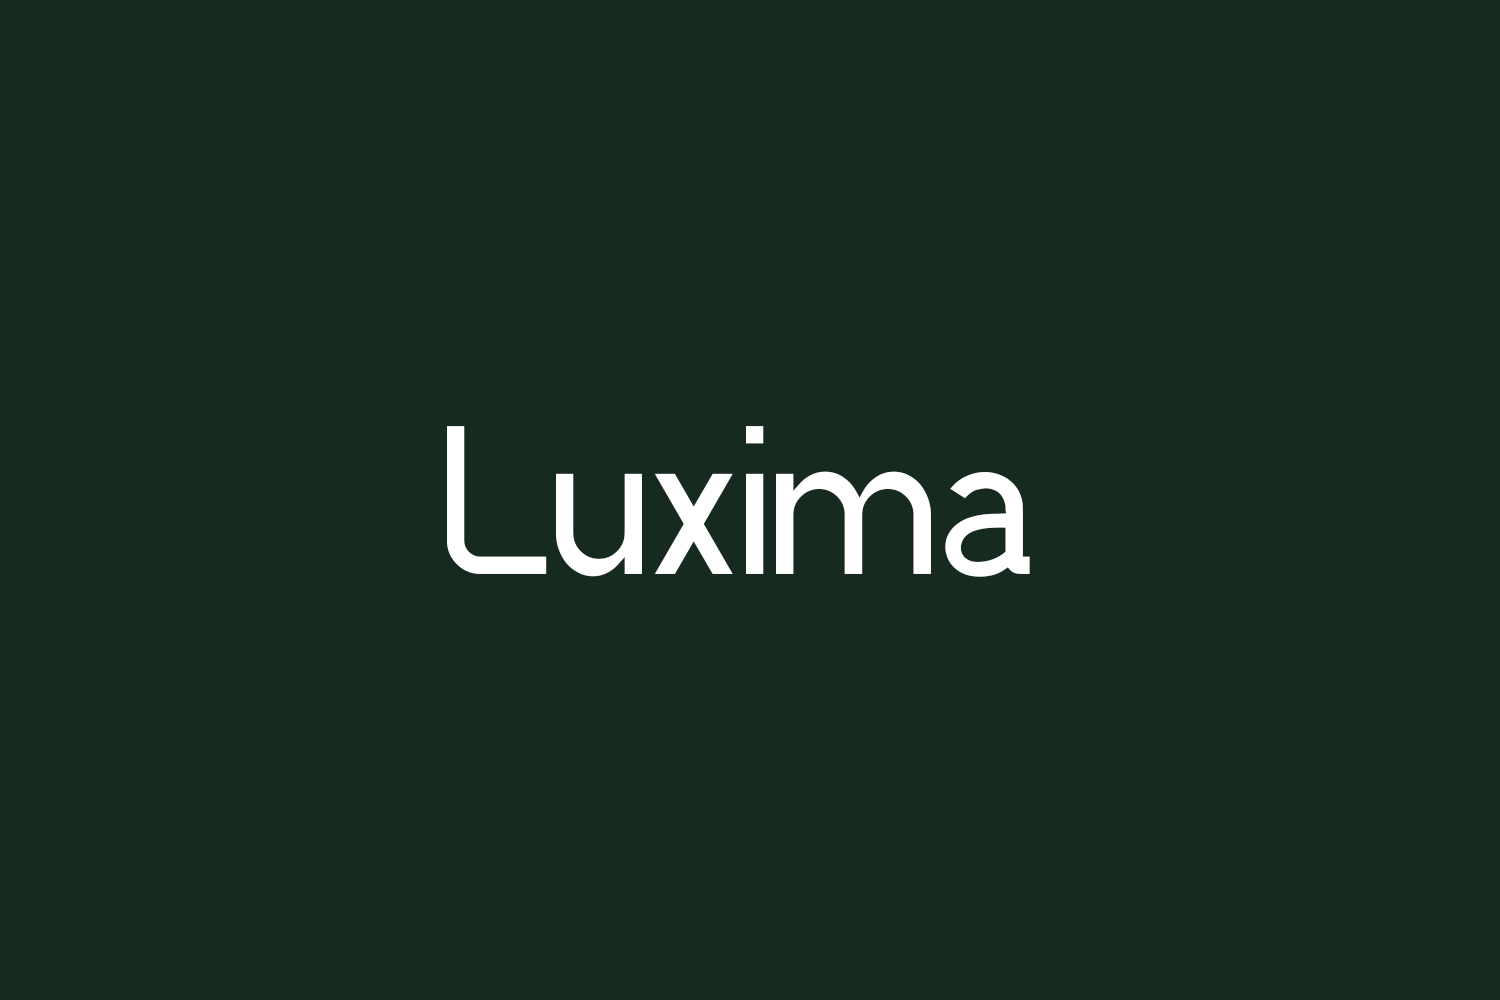 Luxima Free Font